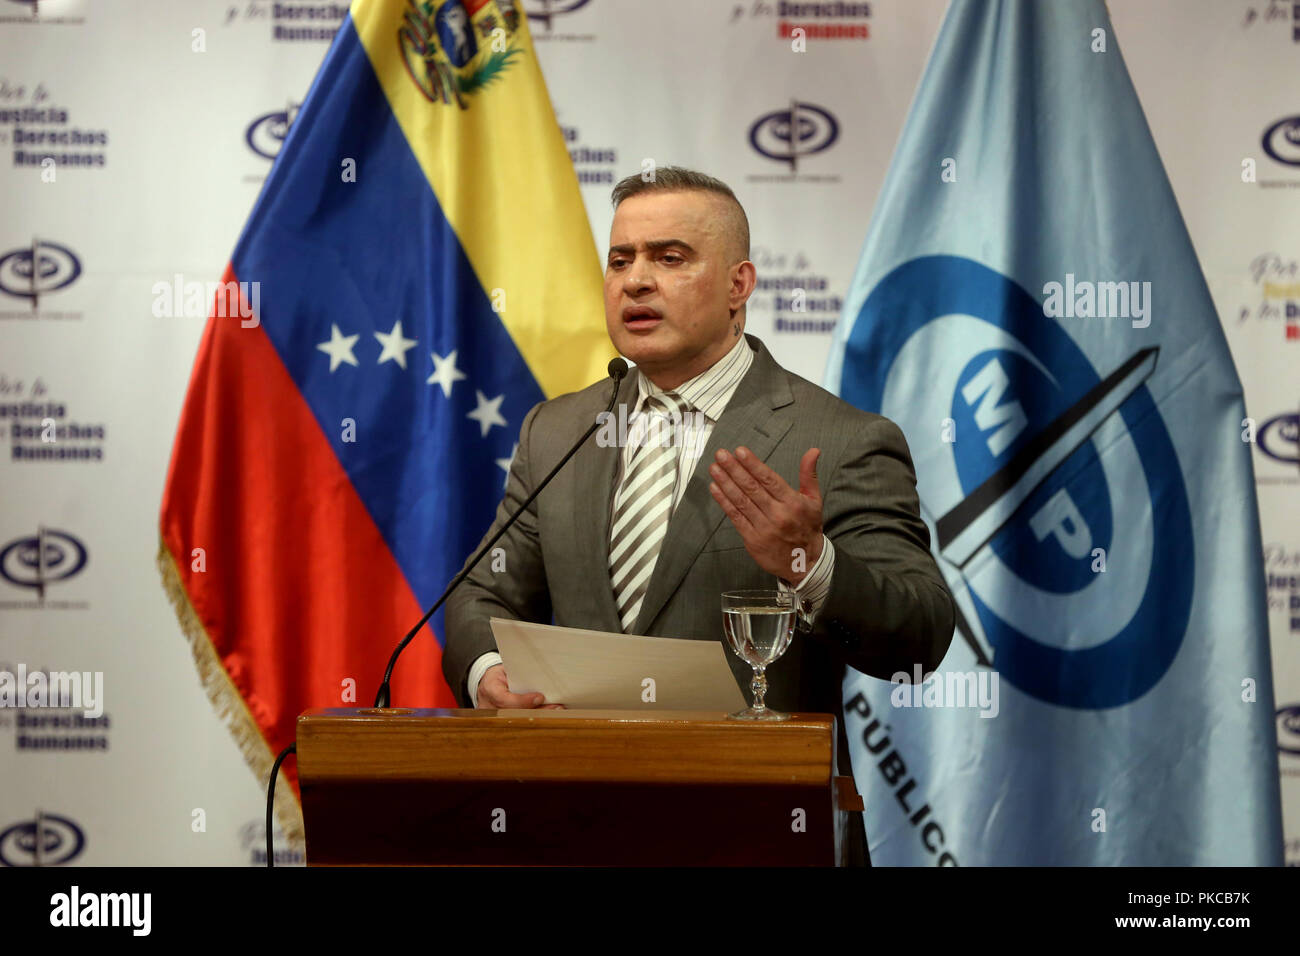 Caracas, Venezuela. 12th Sep, 2018. Venezuela's attorney general Tarek William Saab speaks during a press conference on the progress of the fight against human trafficking at the Public Ministry headquarters, in Caracas, Venezuela, on Sept. 12, 2018. Venezuela has smashed a human trafficking ring that forced women into prostitution, the country's attorney general Tarek William Saab said on Wednesday. Credit: Juan Carlos La Cruz/AVN/Xinhua/Alamy Live News Stock Photo